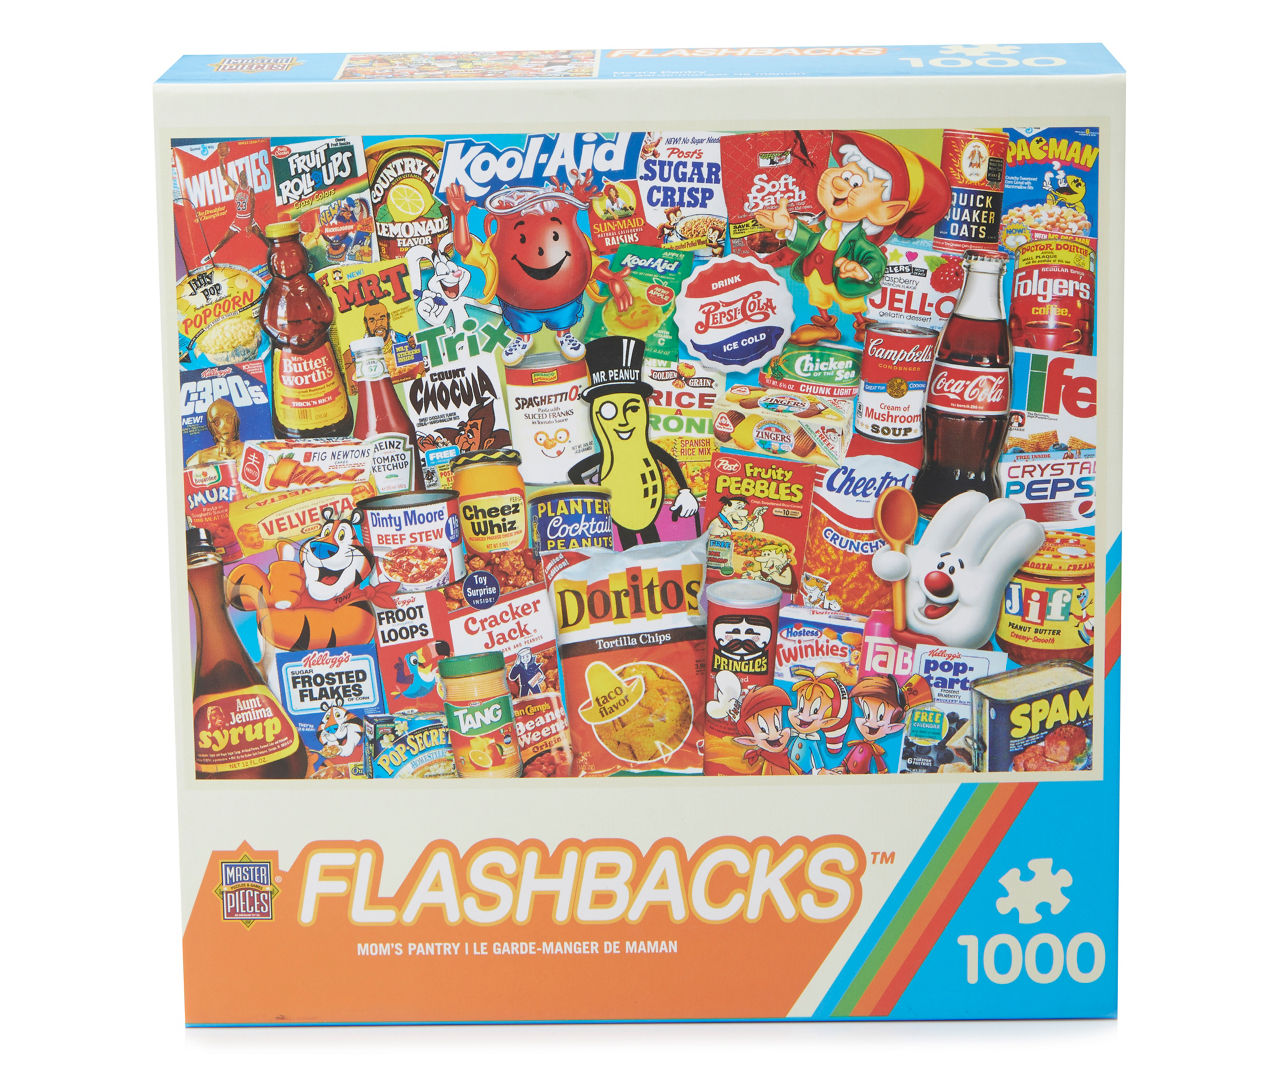 Flashbacks Let The Good Times Roll 1000 pc Puzzle